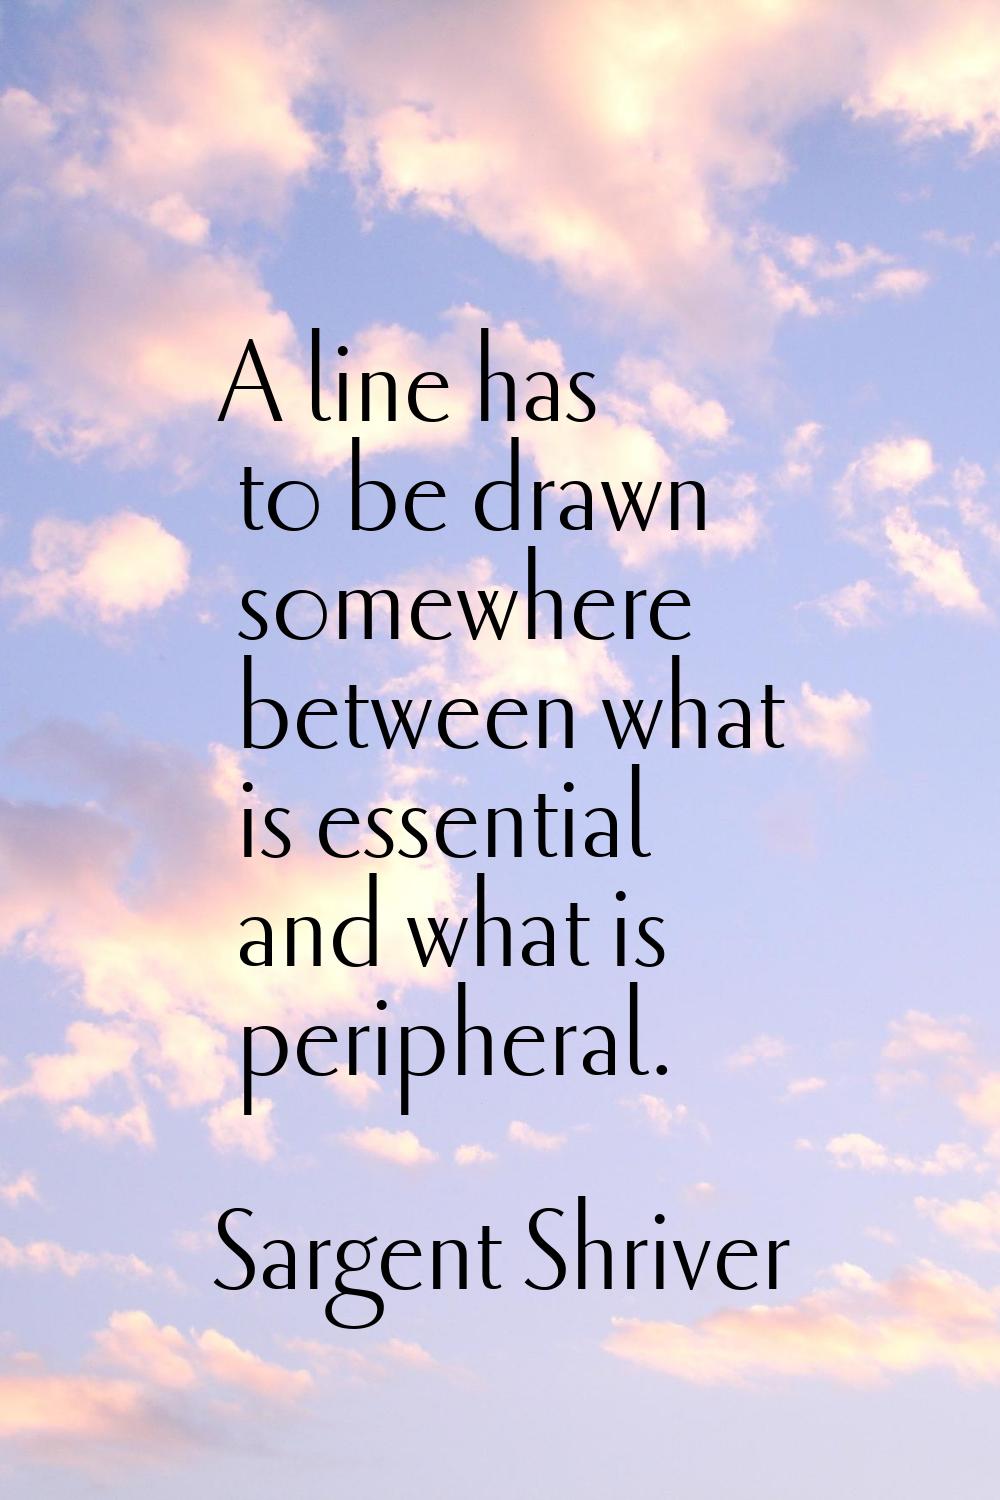 A line has to be drawn somewhere between what is essential and what is peripheral.